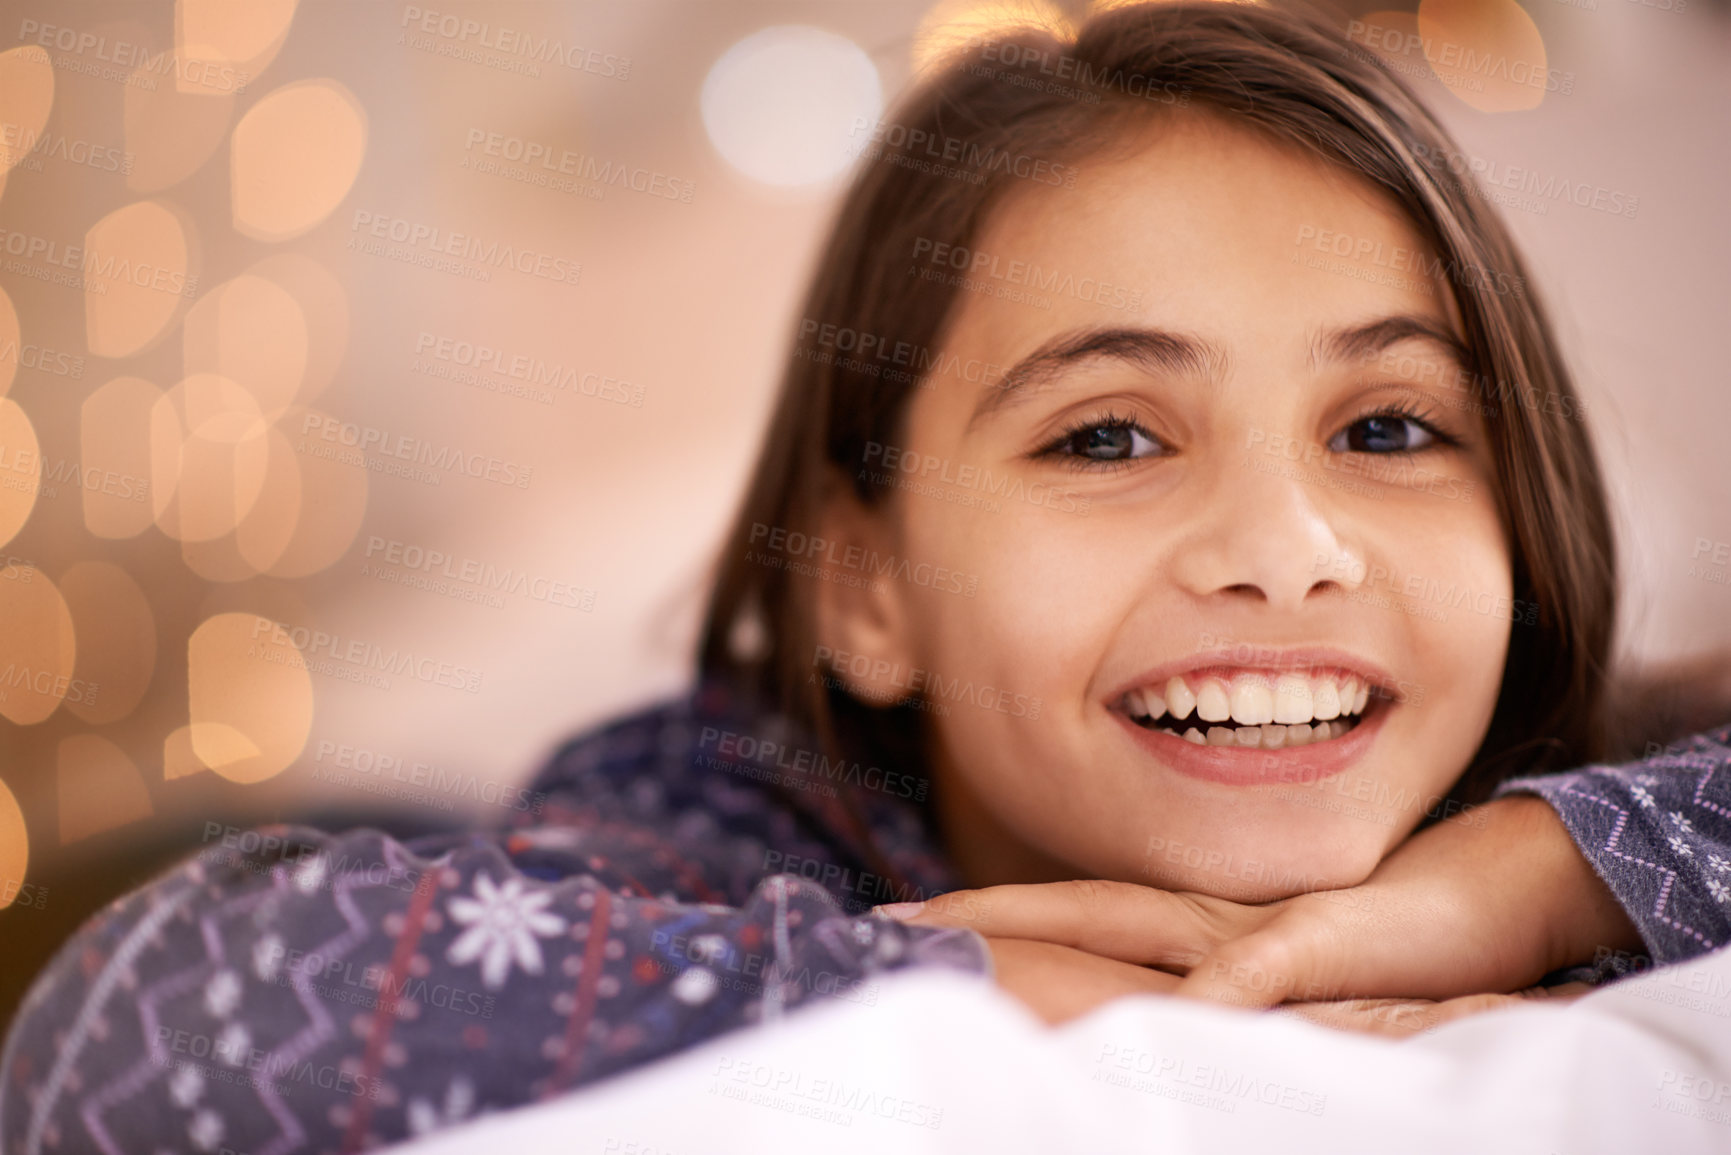 Buy stock photo Home, happy and portrait of child on bed for relaxing, resting and smile in bedroom at night. Youth, blanket and face of young girl with fairy lights for childhood memory, peace and happiness